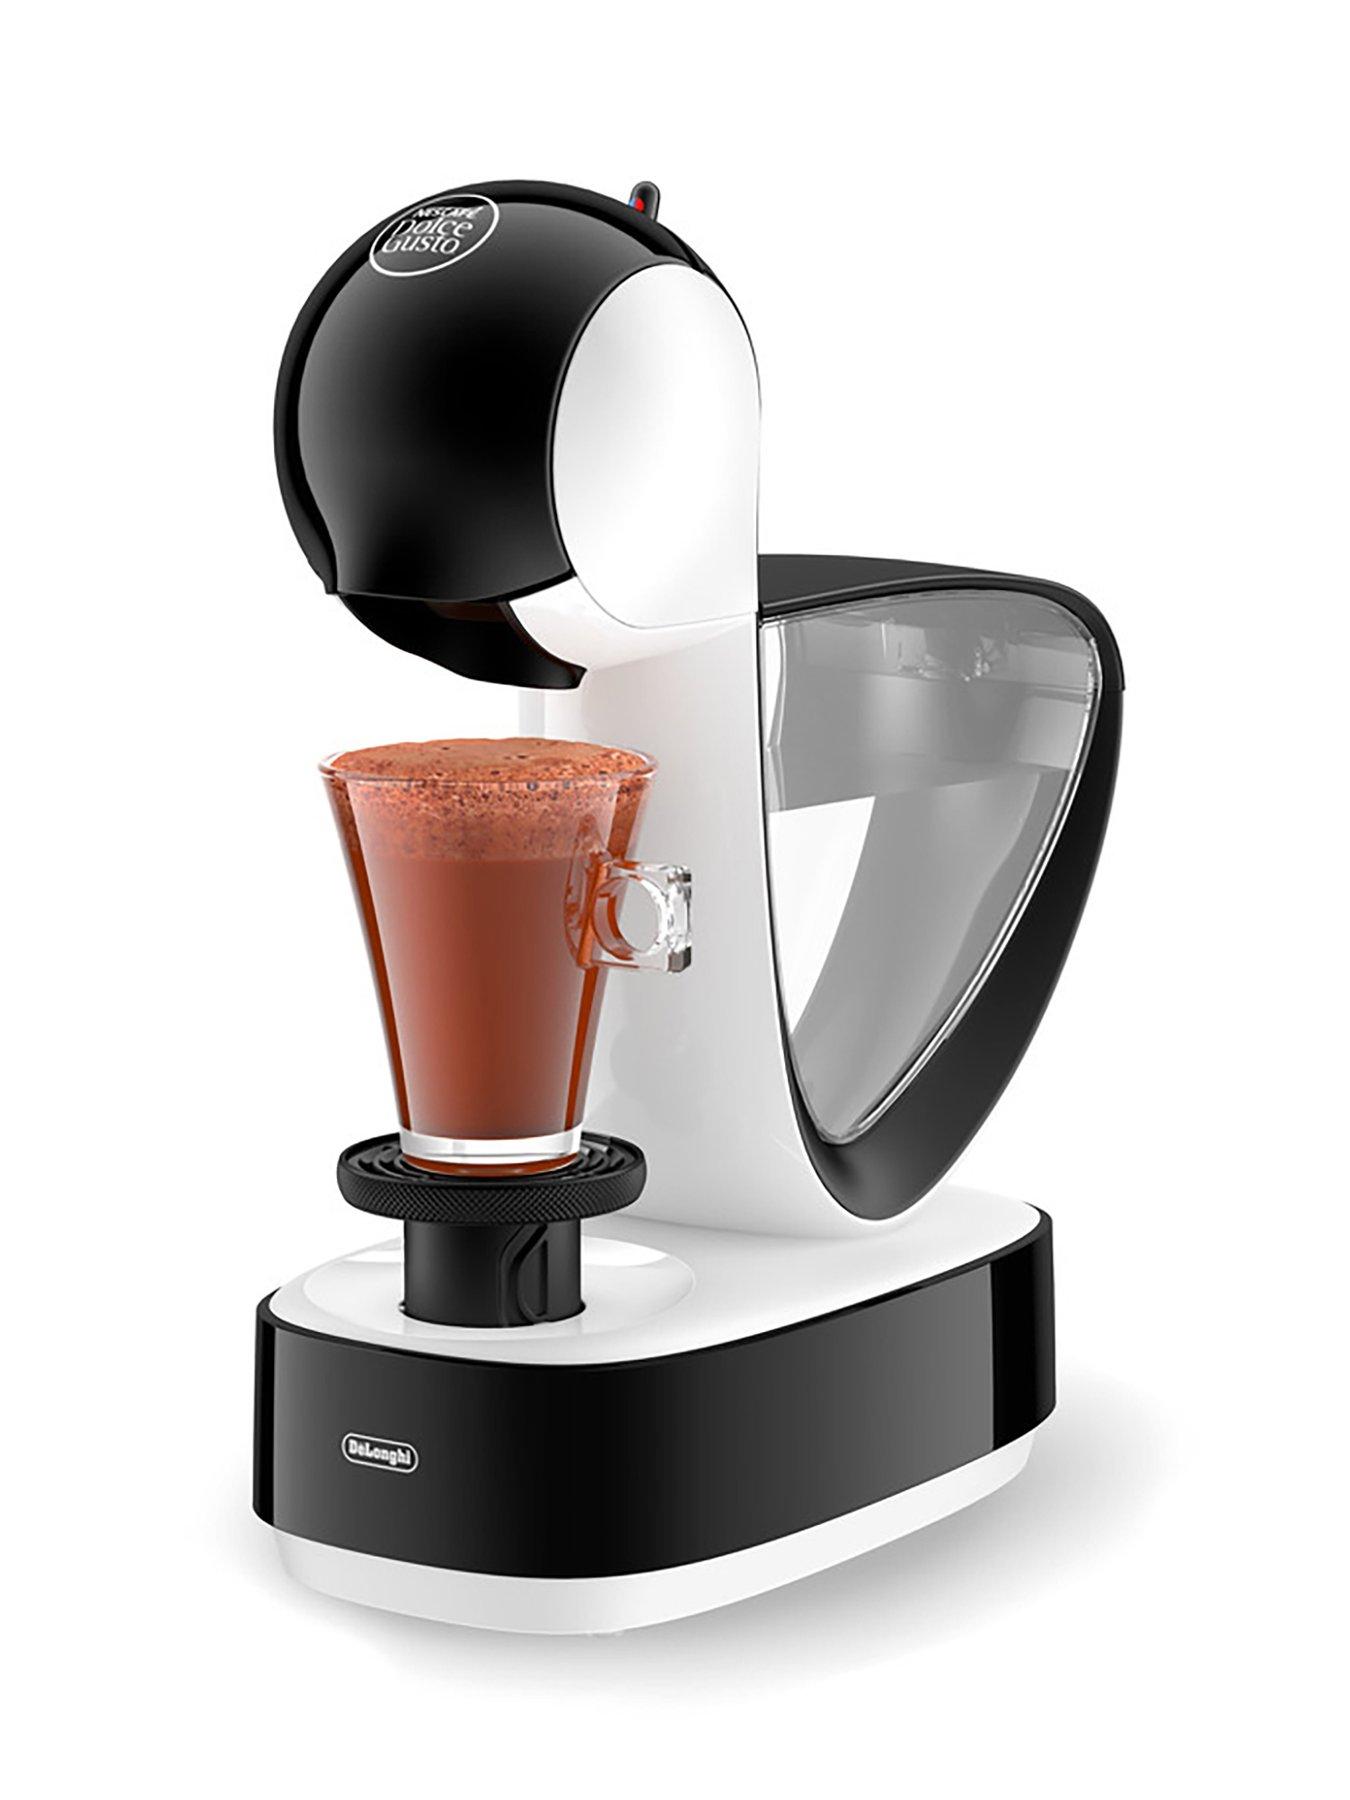 Nescafé Dolce Gusto Cappuccino - 90 cups for 45 cups of coffee